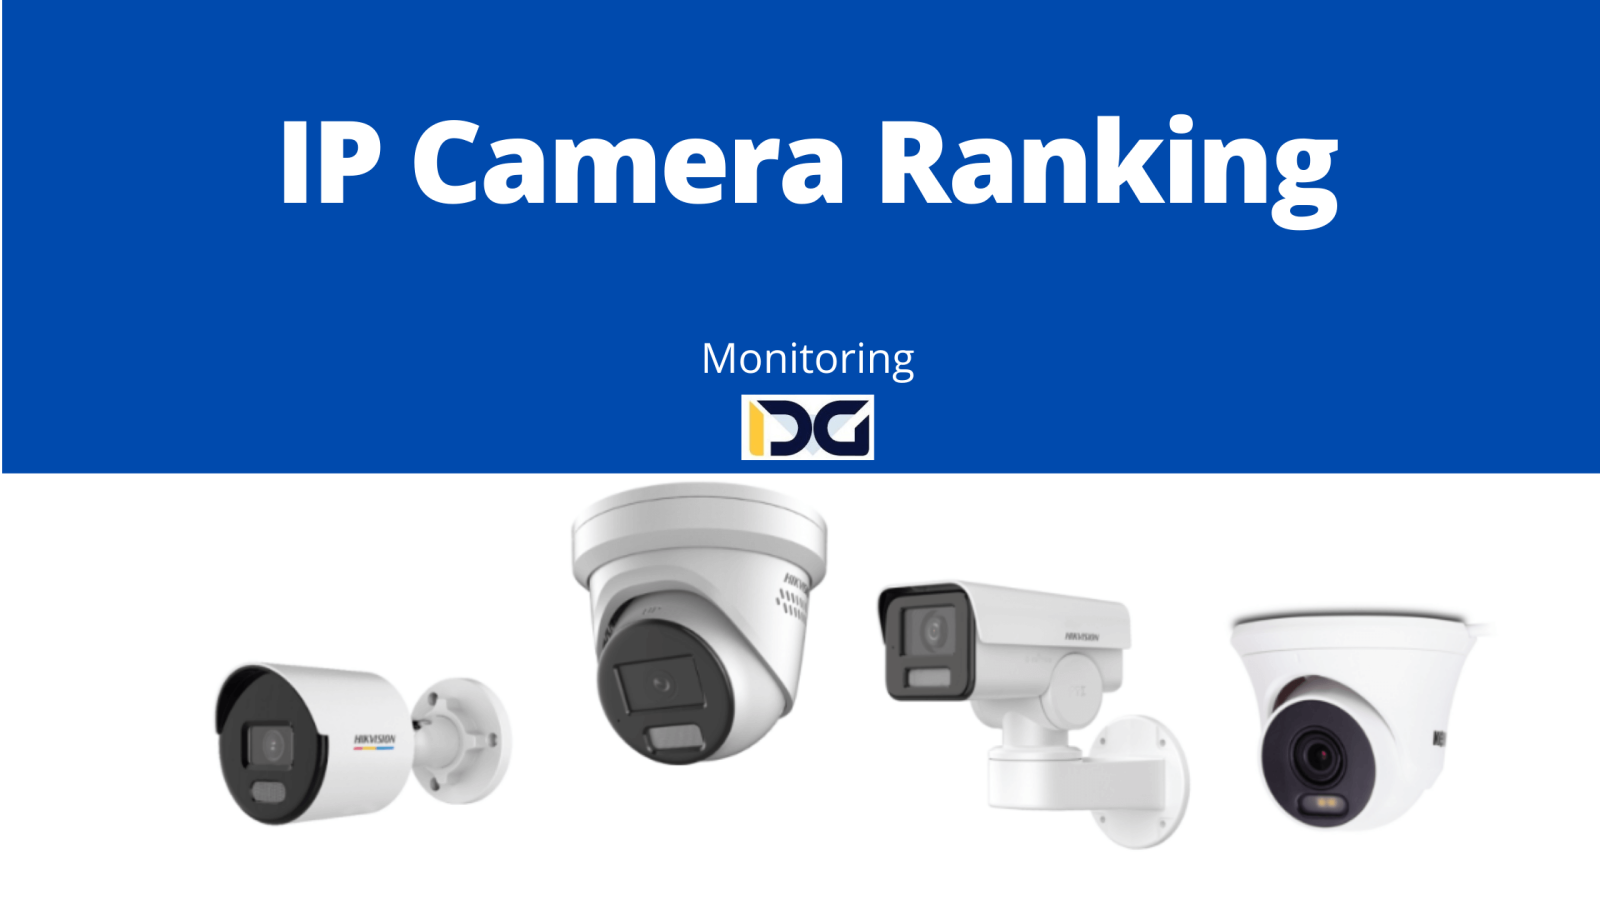 IP Camera Ranking: Top 8 IP Cameras for Monitoring in 2023